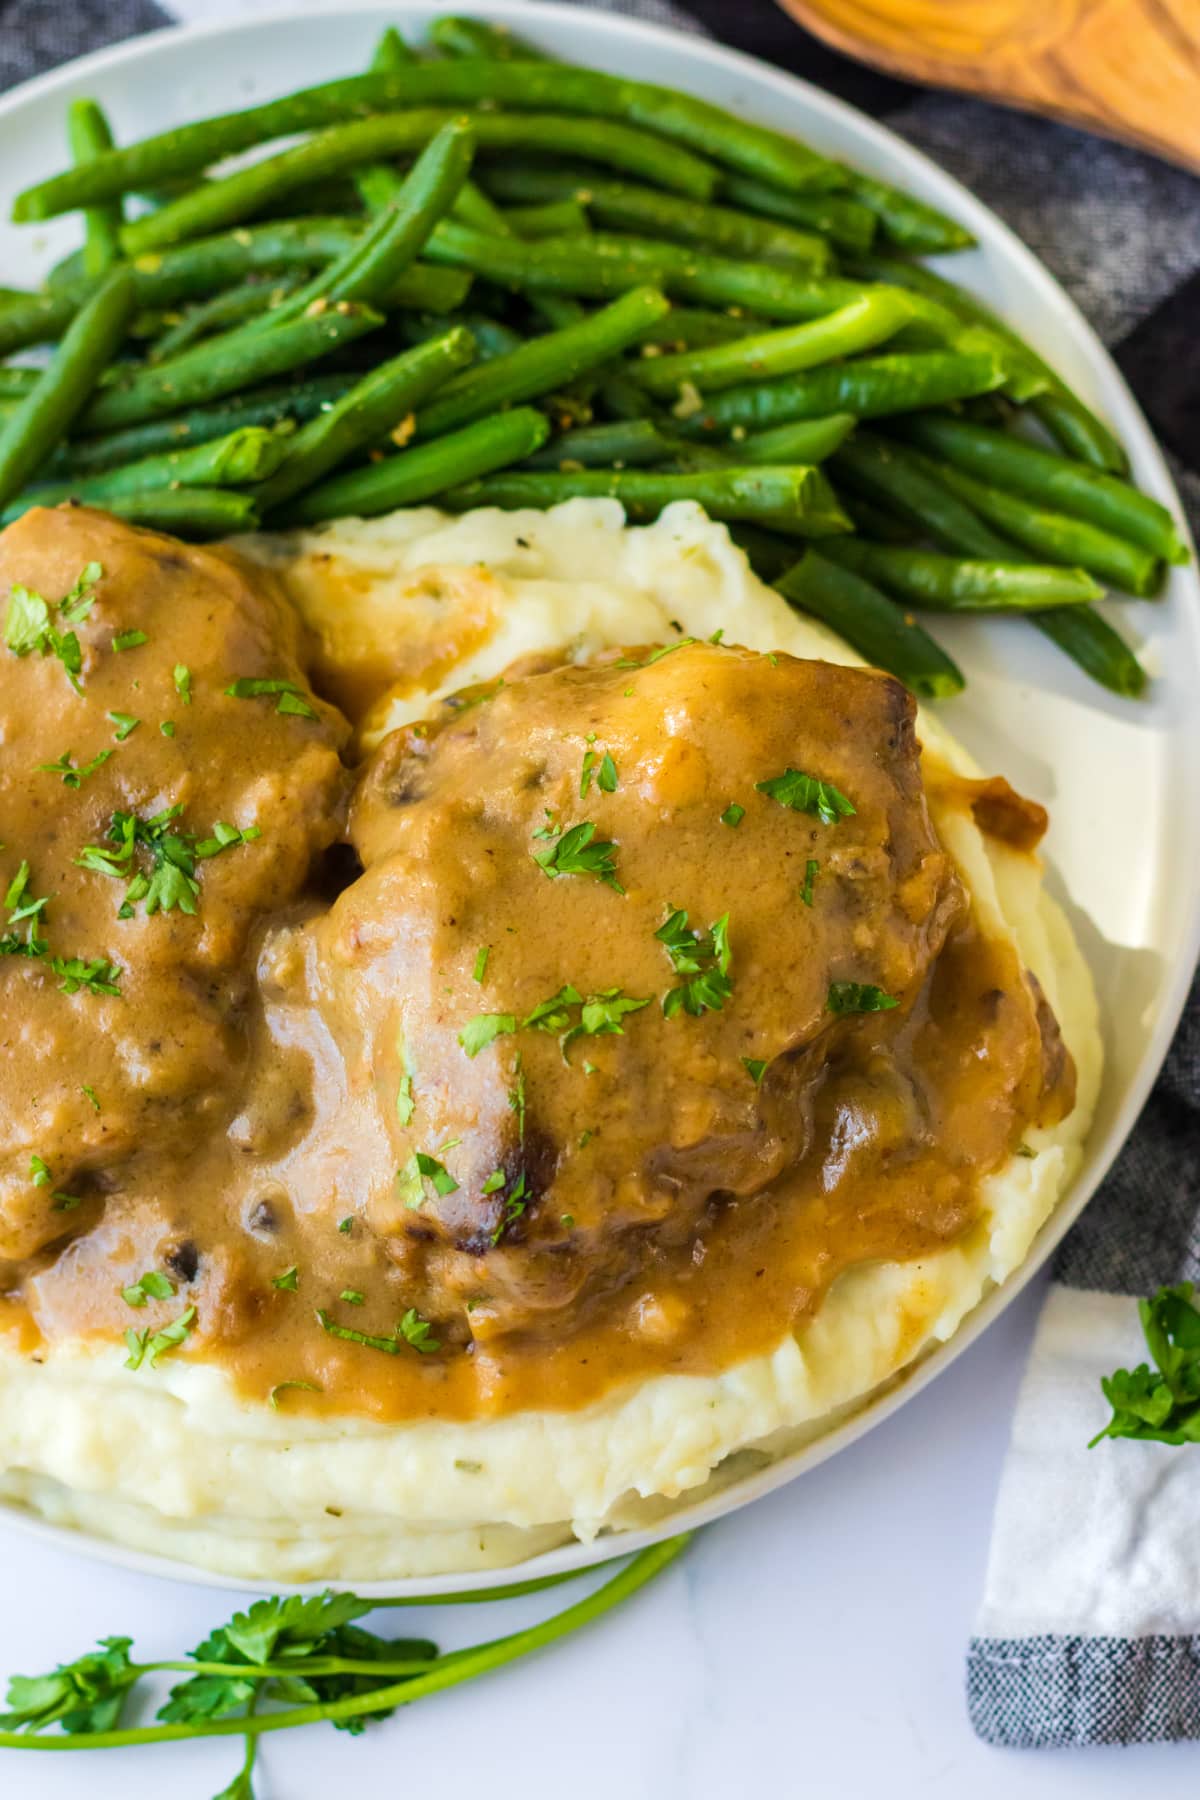 salisbury steak with parsley served over mashed potatoes with green beans